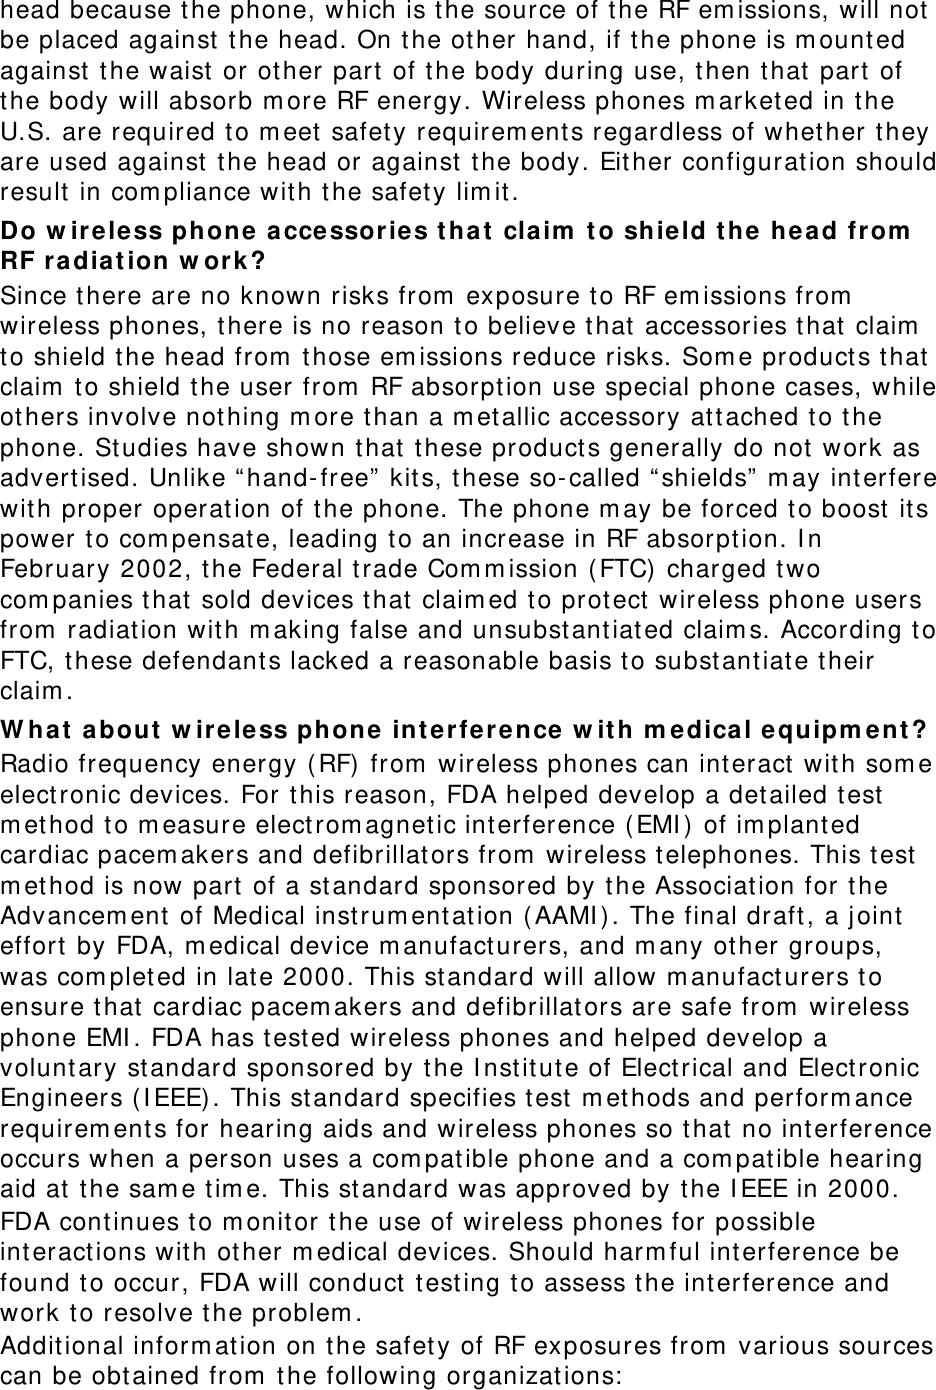 head because t he phone, which is t he source of t he RF em issions, will not  be placed against  the head. On t he other hand, if the phone is m ounted against t he waist  or other part  of t he body during use, t hen t hat part of the body will absorb m ore RF energy. Wireless phones m arket ed in t he U.S. are required to m eet safety requirem ent s regardless of whether t hey are used against  t he head or against  t he body. Eit her configuration should result in com pliance wit h t he safet y lim it. Do w ir e less phone  a ccessories t ha t  cla im  t o shield t he  head fr om  RF ra dia t ion w ork ? Since there are no known risks from  exposure to RF em issions from  wireless phones, t here is no reason t o believe that  accessories t hat claim  to shield t he head from  those em issions reduce risks. Som e products t hat claim  t o shield t he user from  RF absorption use special phone cases, while others involve nothing m ore than a m etallic accessory attached t o t he phone. Studies have shown t hat t hese product s generally do not work as advertised. Unlike “ hand- free”  kits, t hese so-called “ shields”  m ay int erfere with proper operation of the phone. The phone m ay be forced t o boost  its power t o com pensat e, leading to an increase in RF absorpt ion. I n February 2002, t he Federal t rade Com m ission ( FTC) charged t wo com panies t hat sold devices that  claim ed t o protect  wireless phone users from  radiation with m aking false and unsubstantiat ed claim s. According t o FTC, these defendant s lacked a reasonable basis t o substant iate t heir claim . W hat  about  w ireless phone int er fe r e nce  w it h m edical e quipm ent ? Radio frequency energy ( RF)  from  wireless phones can int eract  wit h som e elect ronic devices. For t his reason, FDA helped develop a detailed test  m et hod t o m easure elect rom agnetic int erference ( EMI ) of im plant ed cardiac pacem akers and defibrillat ors from  wireless t elephones. This t est m et hod is now part of a standard sponsored by t he Association for t he Advancem ent  of Medical inst rum ent ation ( AAMI ) . The final draft , a j oint  effort  by FDA, m edical device m anufact urers, and m any other groups, was com plet ed in late 2000. This standard will allow m anufact urers t o ensure t hat  cardiac pacem akers and defibrillat ors are safe from  wireless phone EMI . FDA has test ed wireless phones and helped develop a voluntary st andard sponsored by the I nst it ut e of Elect rical and Elect ronic Engineers ( I EEE). This standard specifies t est m ethods and perform ance requirem ent s for hearing aids and wireless phones so t hat no int erference occurs when a person uses a com pat ible phone and a com pat ible hearing aid at the sam e t im e. This standard was approved by the I EEE in 2000. FDA continues t o m onitor t he use of wireless phones for possible interactions wit h ot her m edical devices. Should harm ful int erference be found t o occur, FDA will conduct test ing t o assess t he interference and work to resolve t he problem . Additional inform ation on the safet y of RF exposures from  various sources can be obtained from  the following organizat ions:  